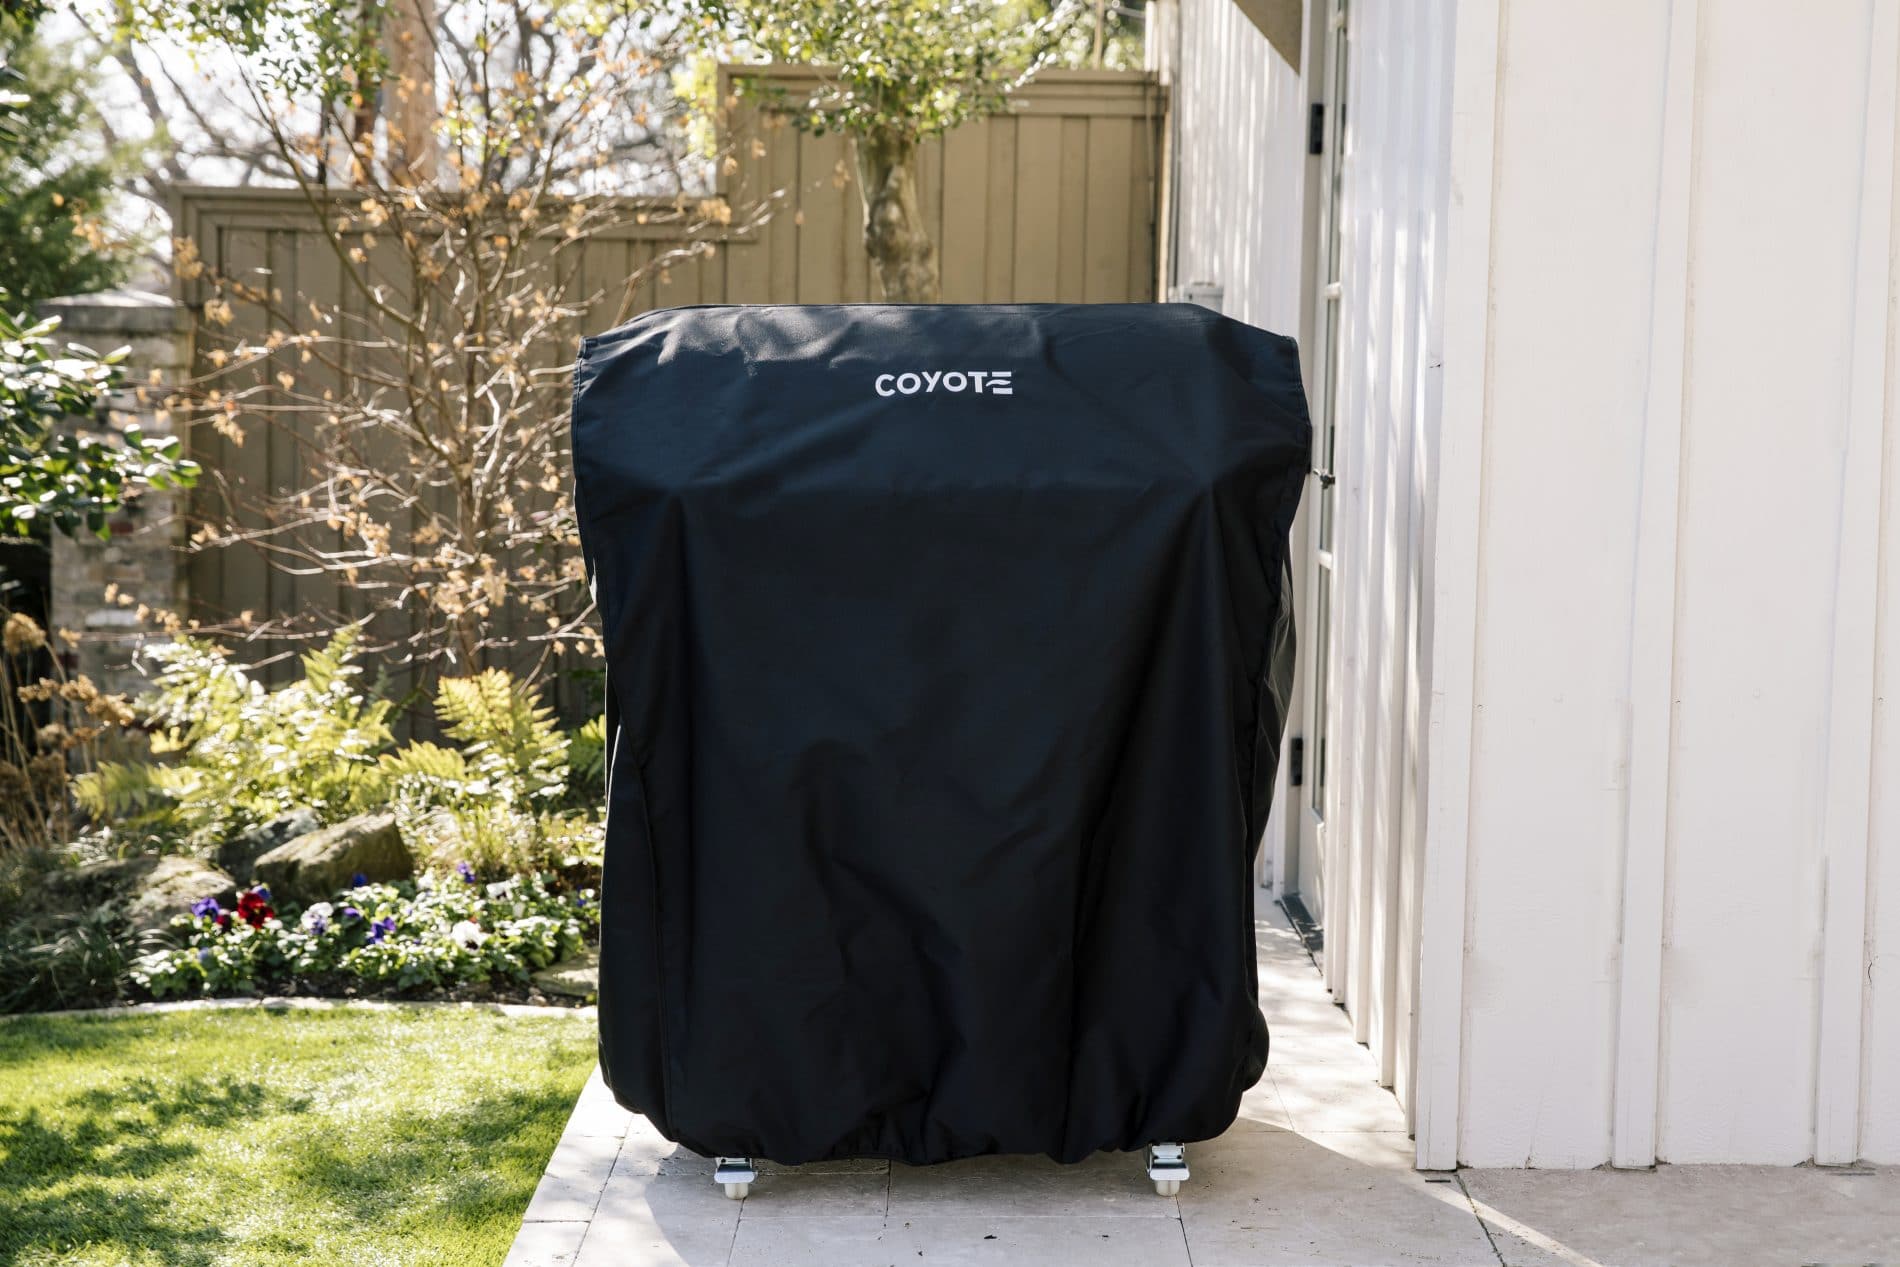 Coyote Grill Cover (Grill plus Cart) for 34"W Grills Cart and Grill Cover